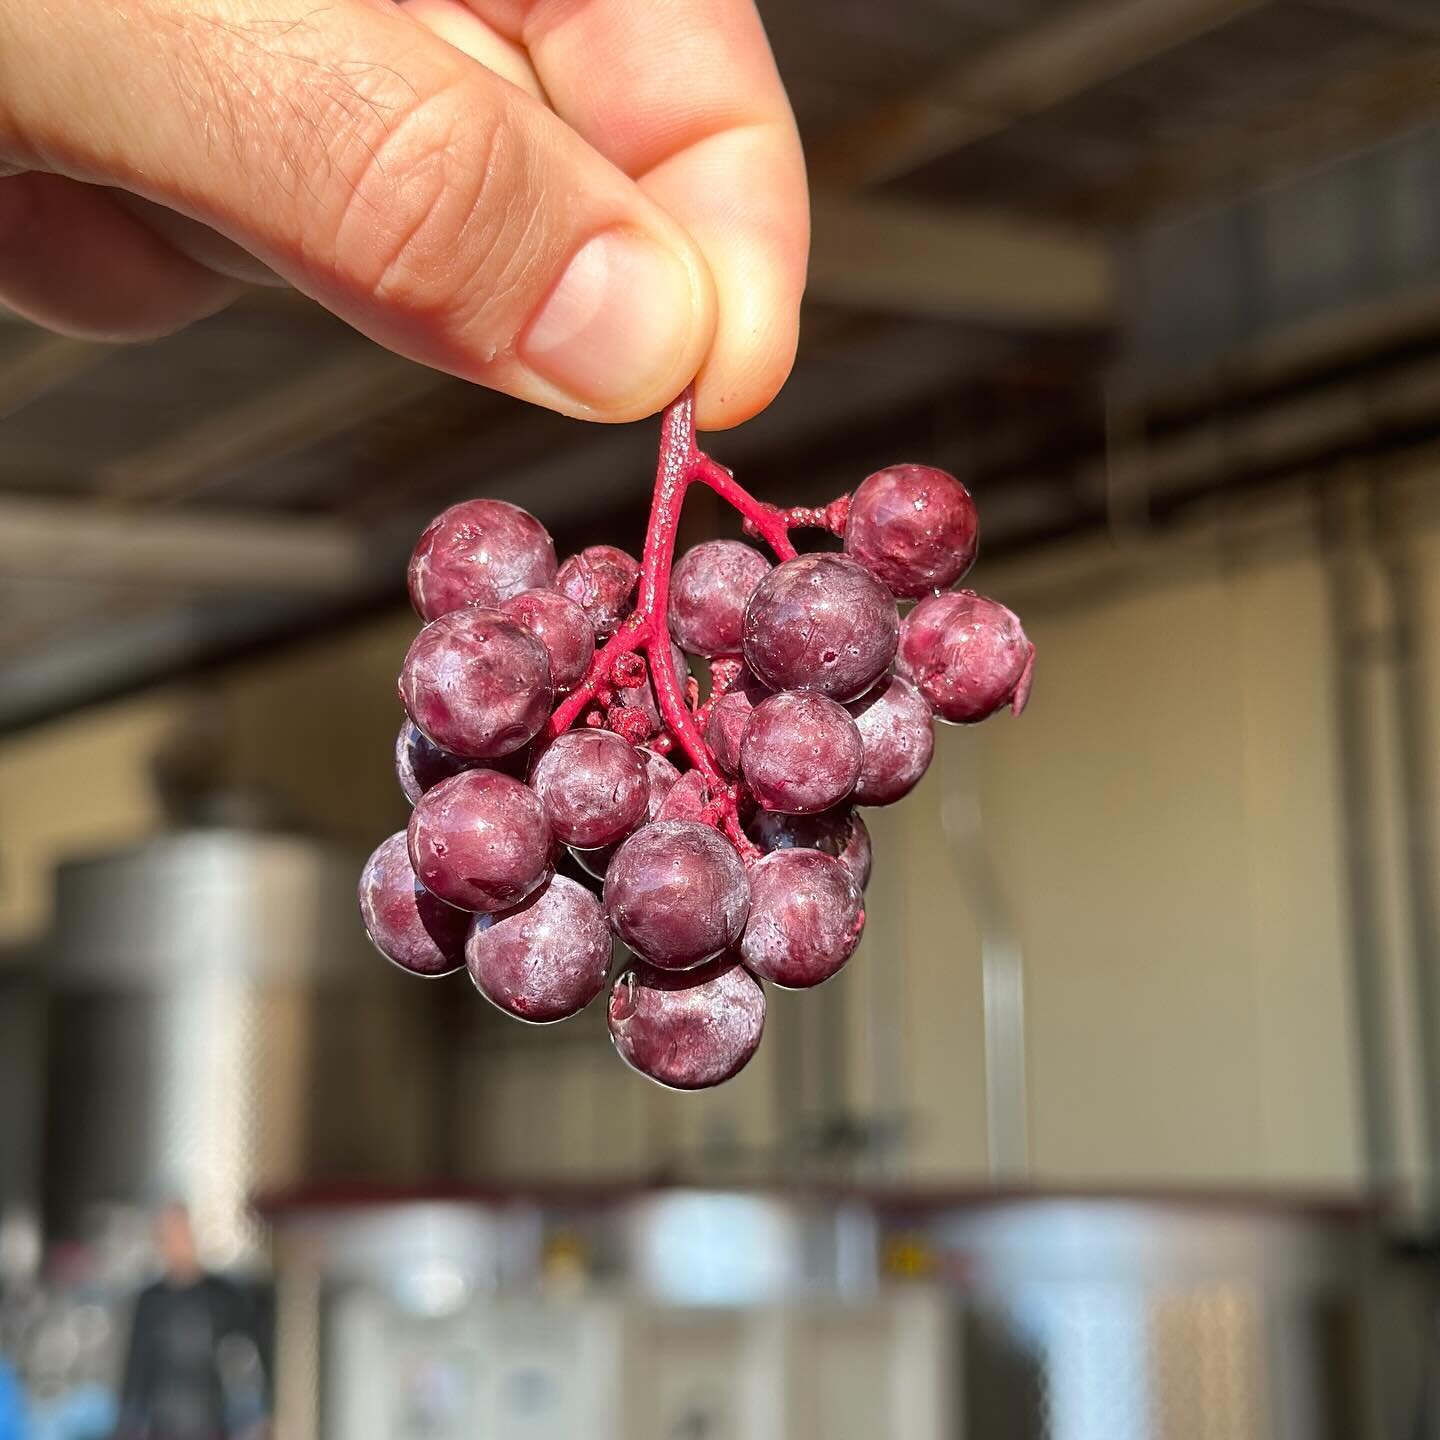 🍇 Ready for a Squeeze
Our last press of harvest is always reserved for our Three Gardens Cabernet. This year it&rsquo;s smelling extra fancy from the long hang time on the vine. From today on, we&rsquo;re just thinking about liquids!
#harvest2023